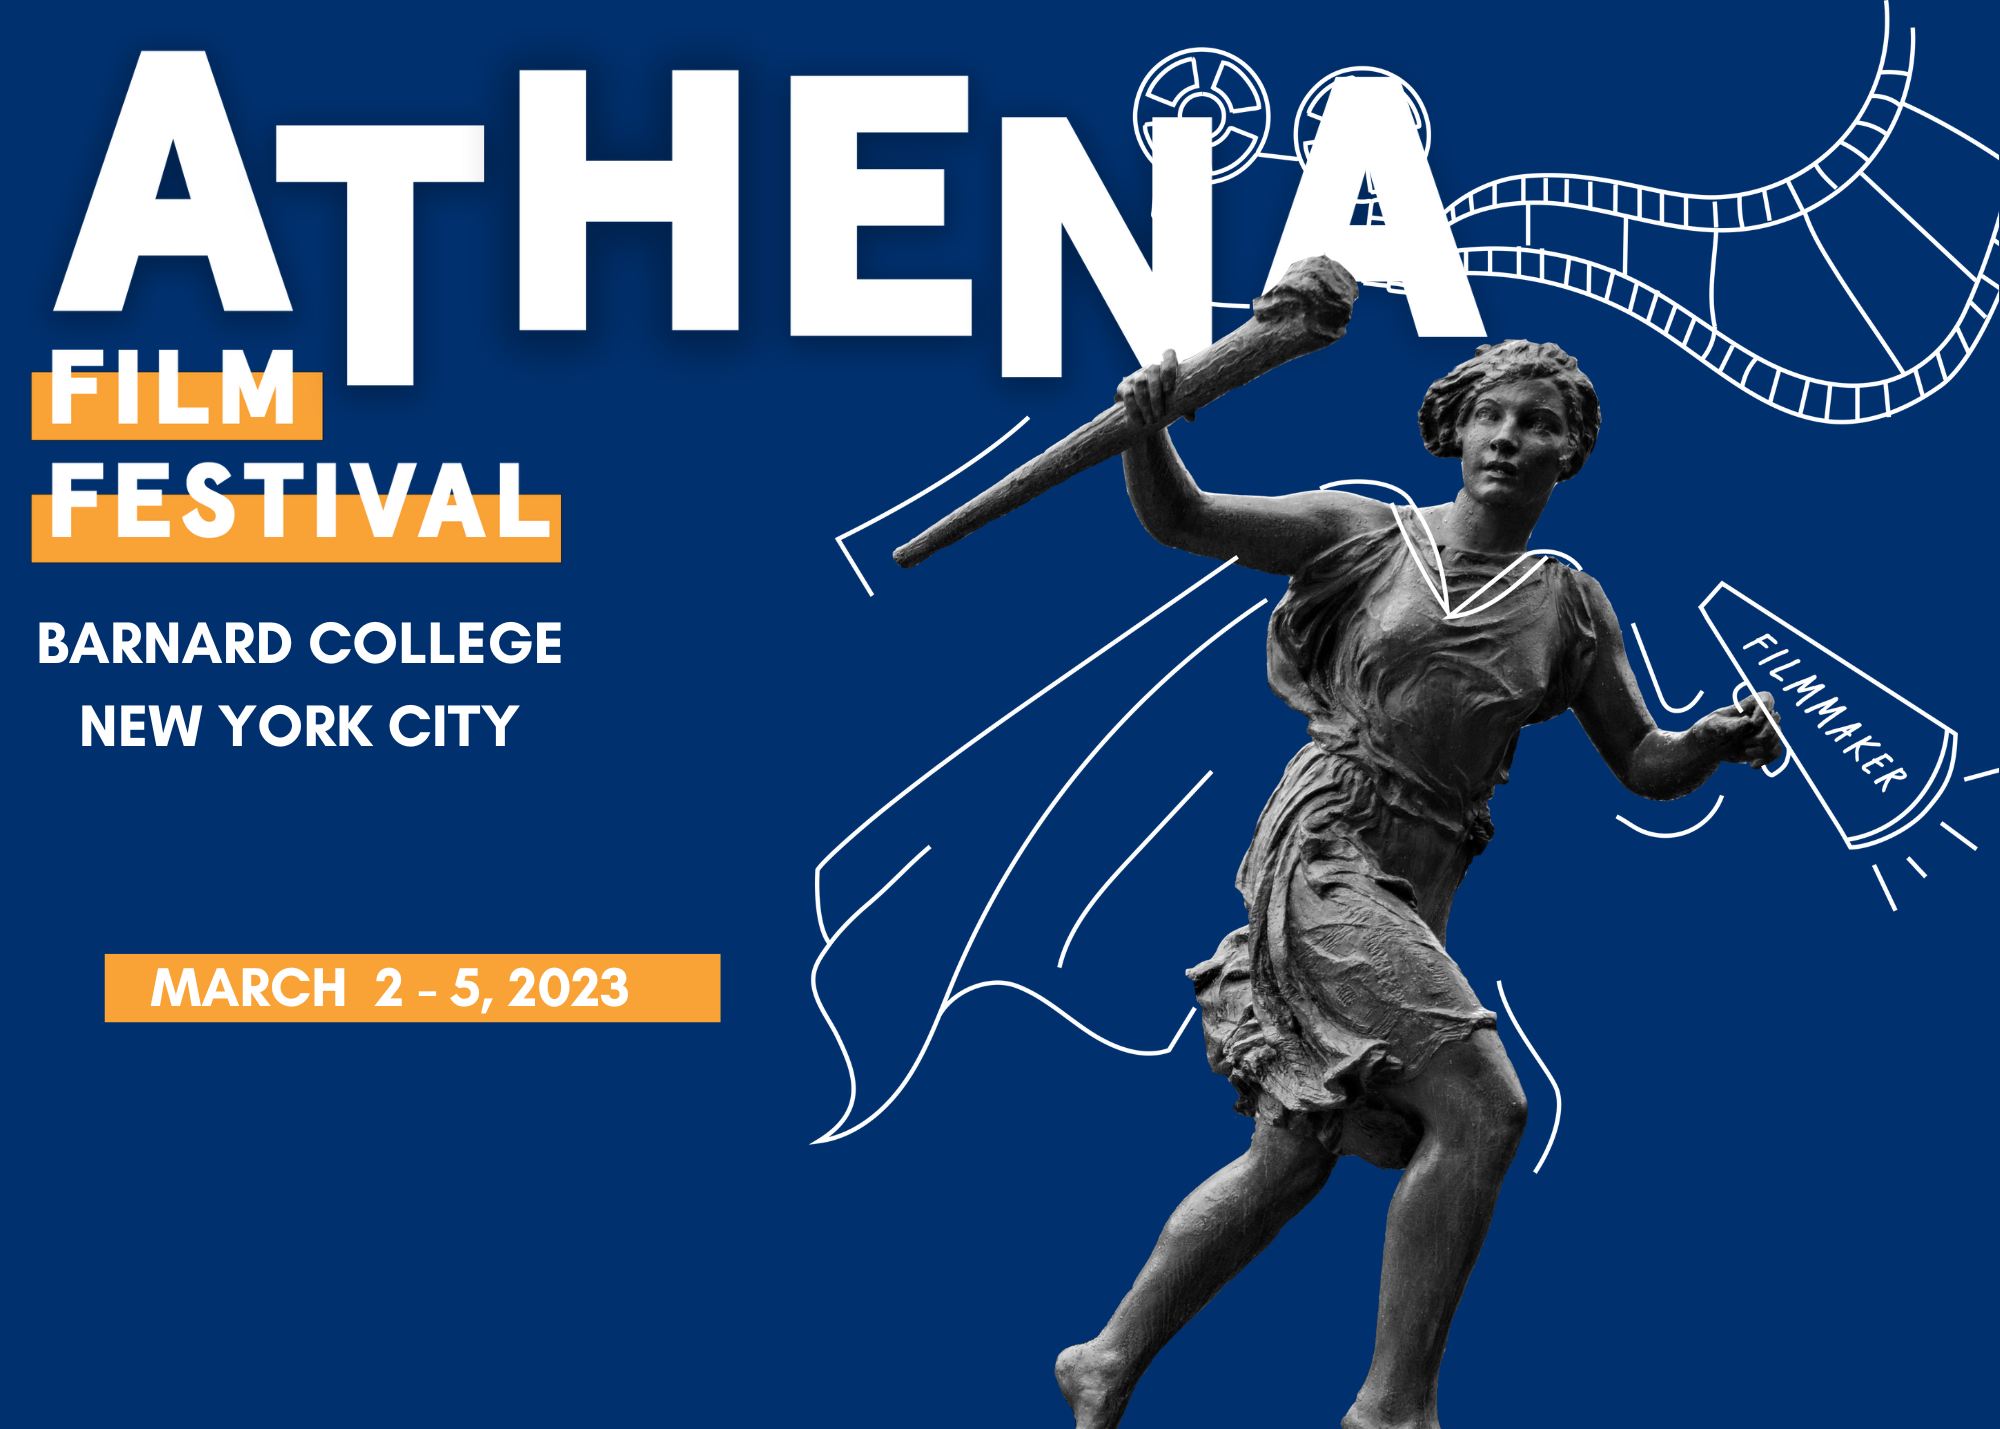 Save the Date for Athena 2023: March 2 - 5, 2023